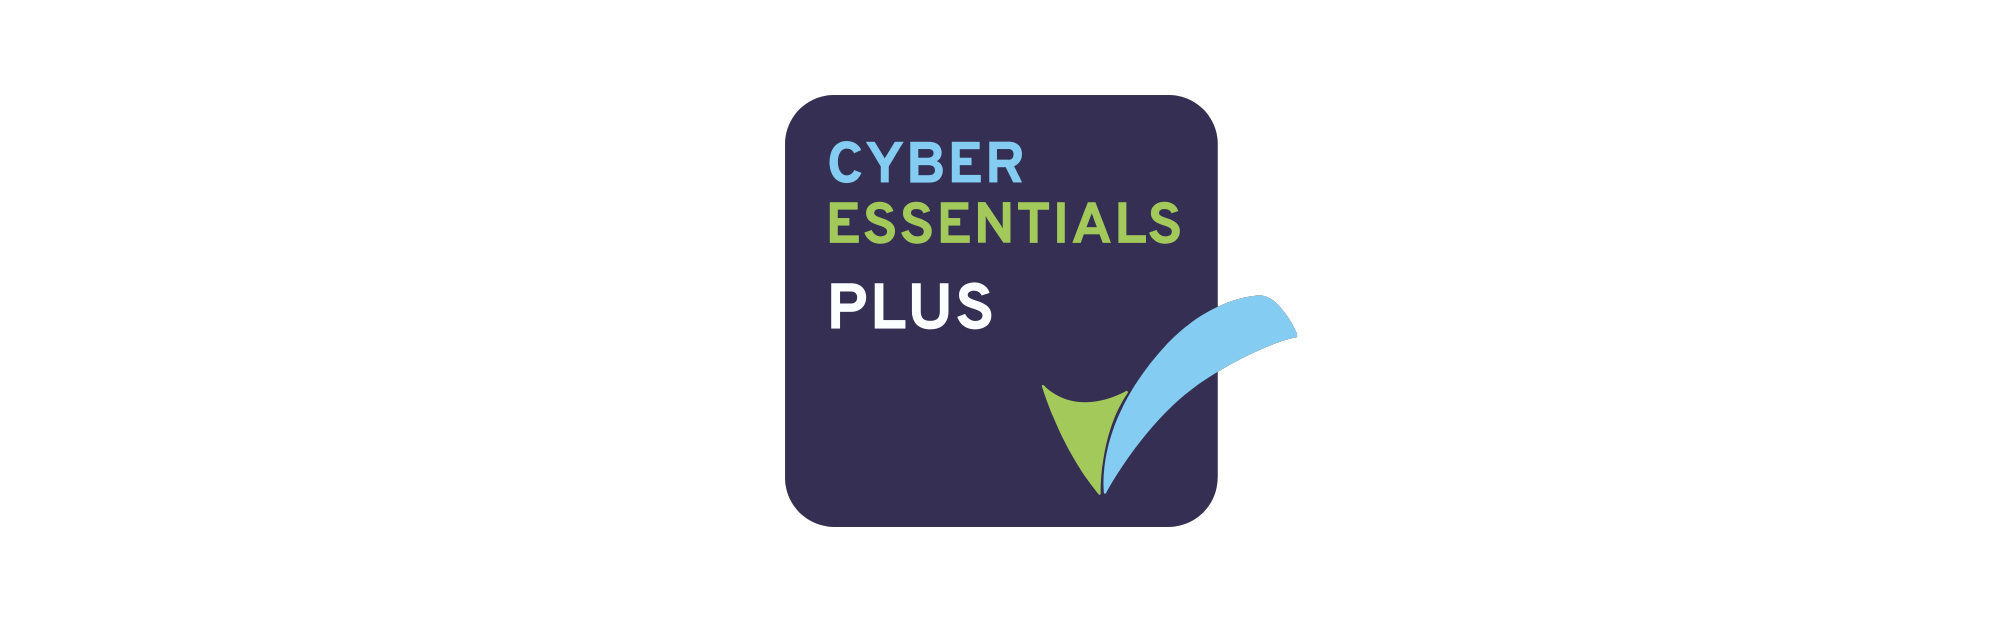 Centrality Secures Cyber Essentials Plus Certification